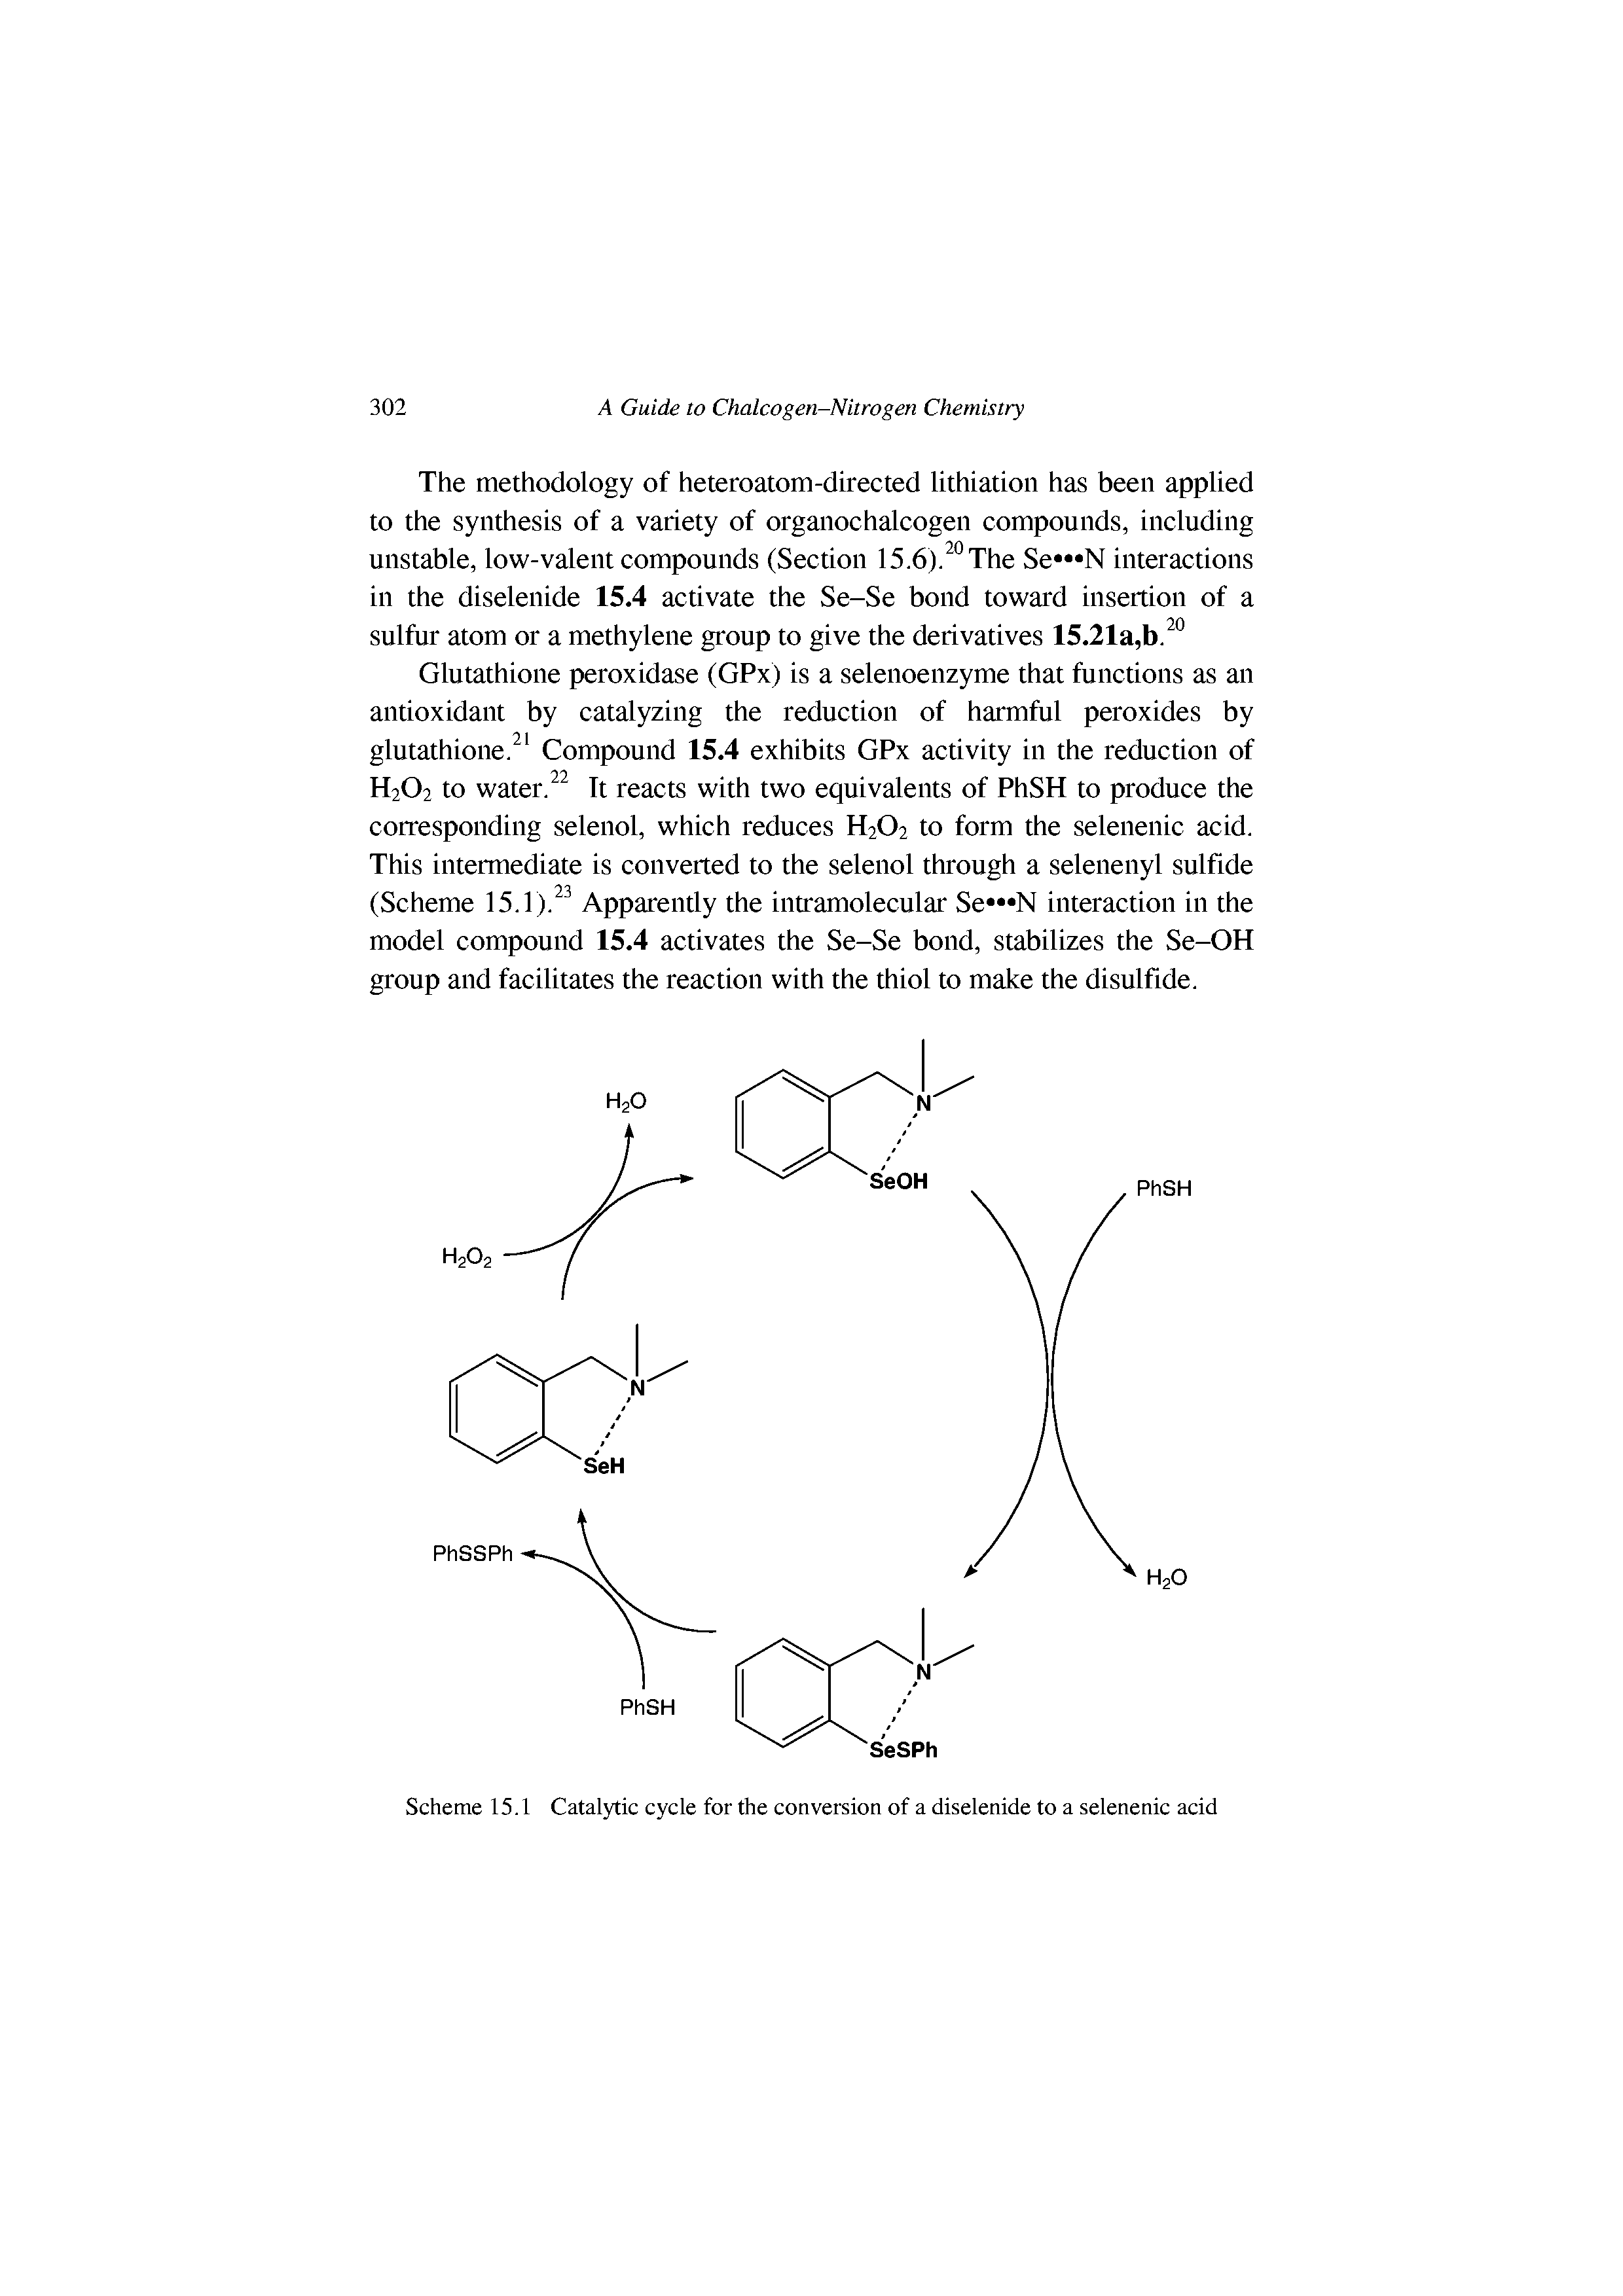 Scheme 15.1 Catalytic cycle for the conversion of a diselenide to a selenenic acid...